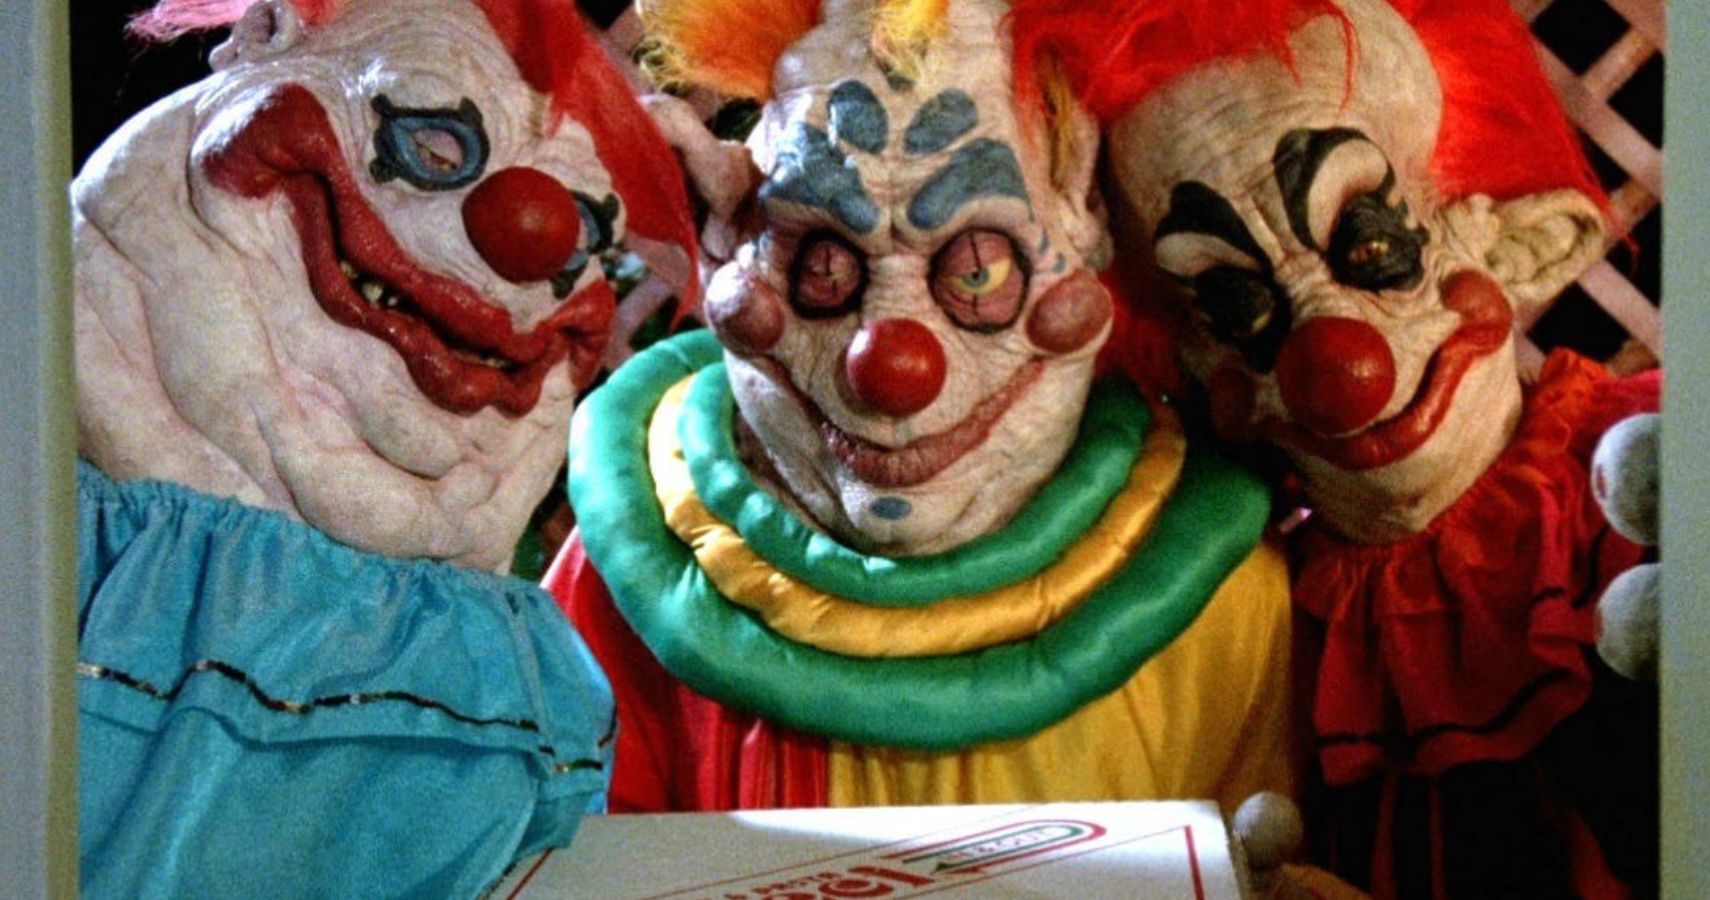 Killer Klowns from Outer Space with Pizza